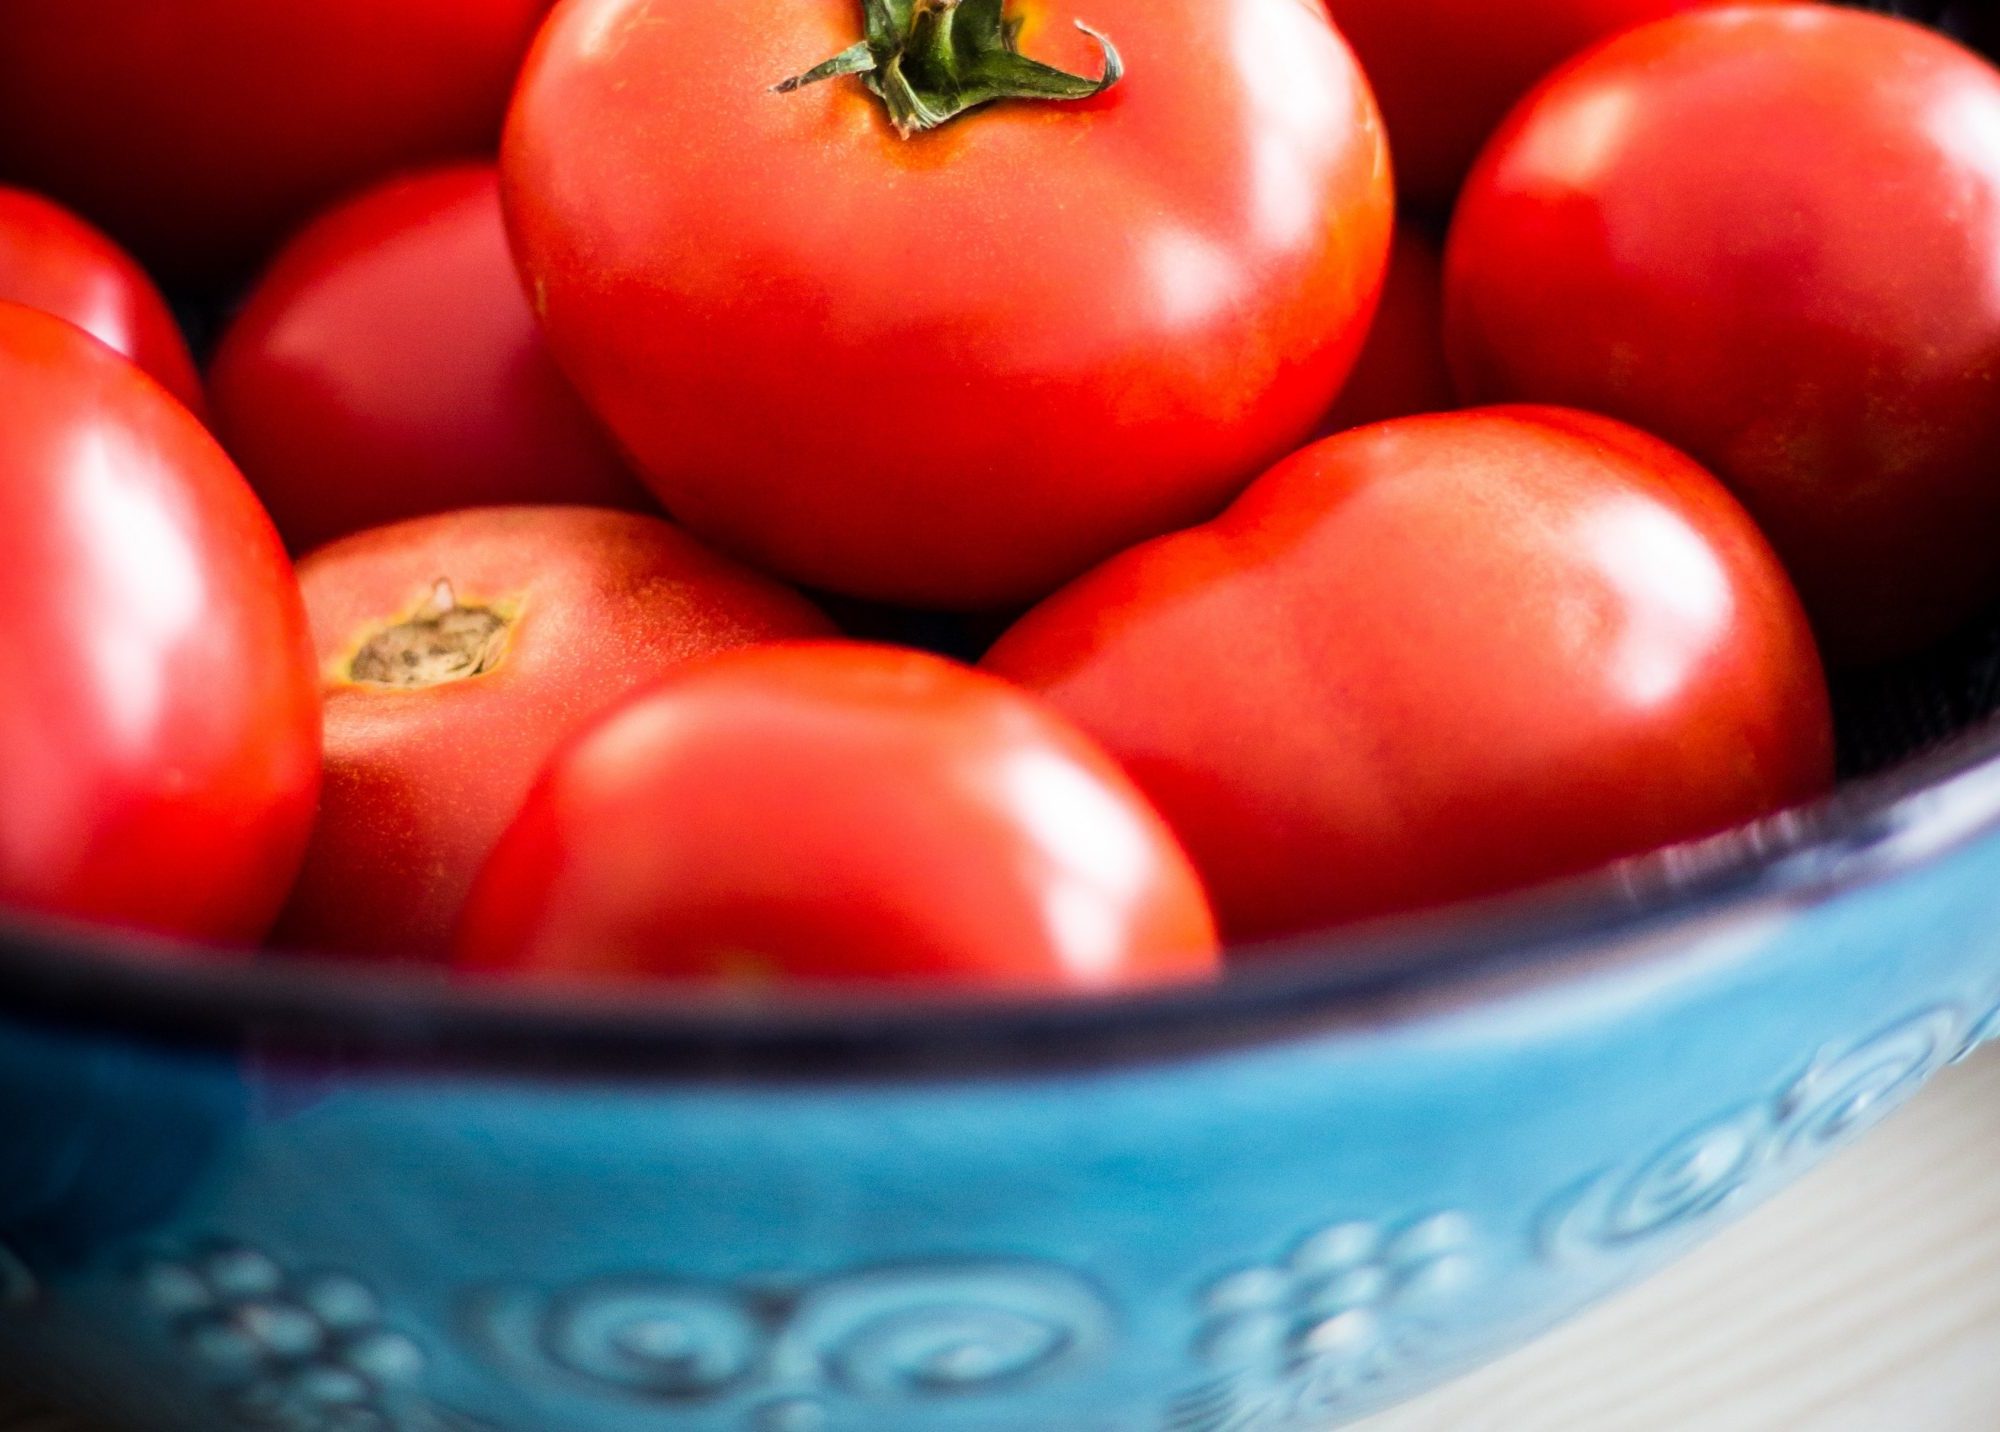 Tomatoes - the basis of the Mediterranean diet